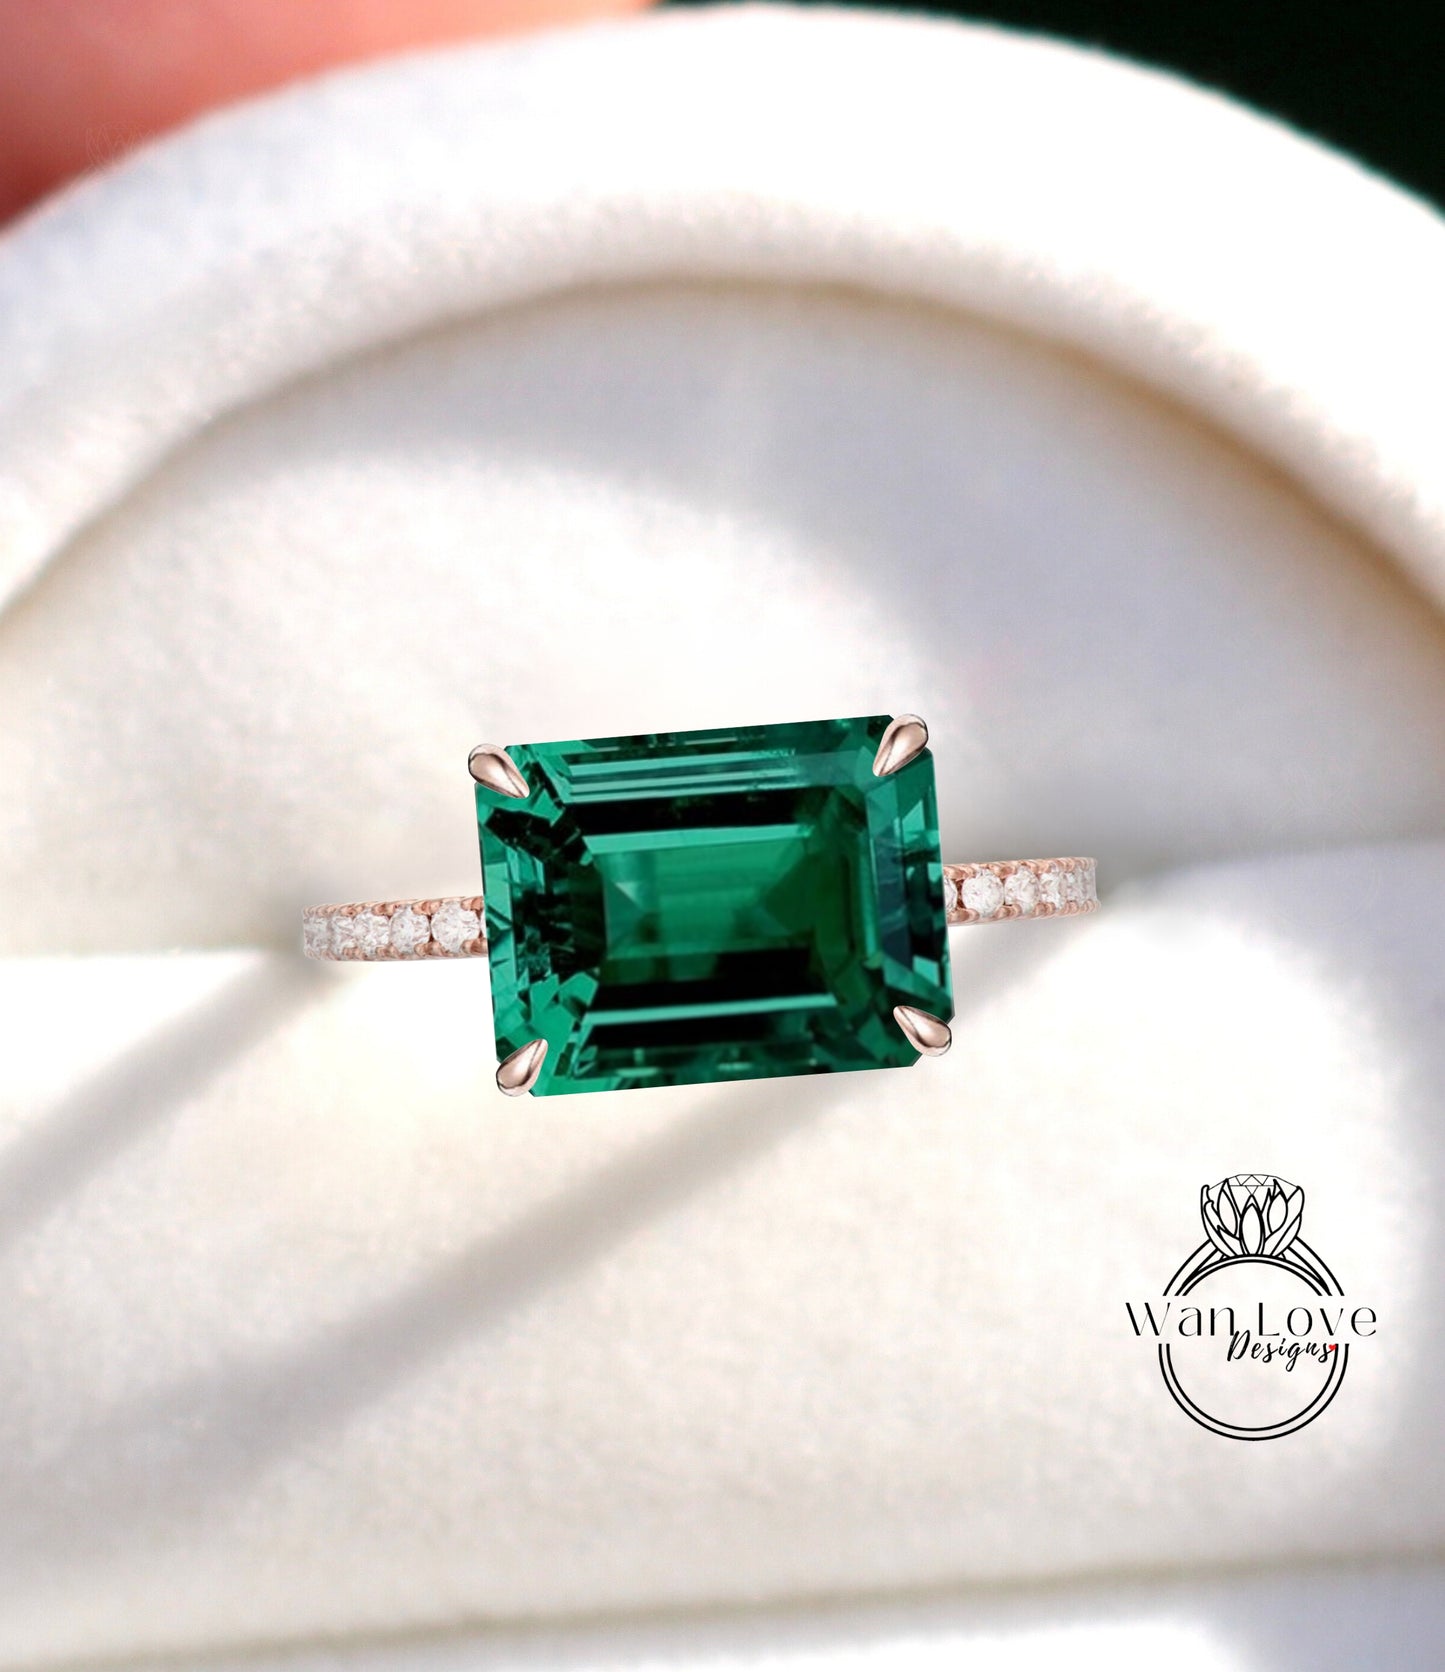 Emerald engagement ring gold Unique east west Halo vintage engagement ring women almost eternity diamond wedding Anniversary gift